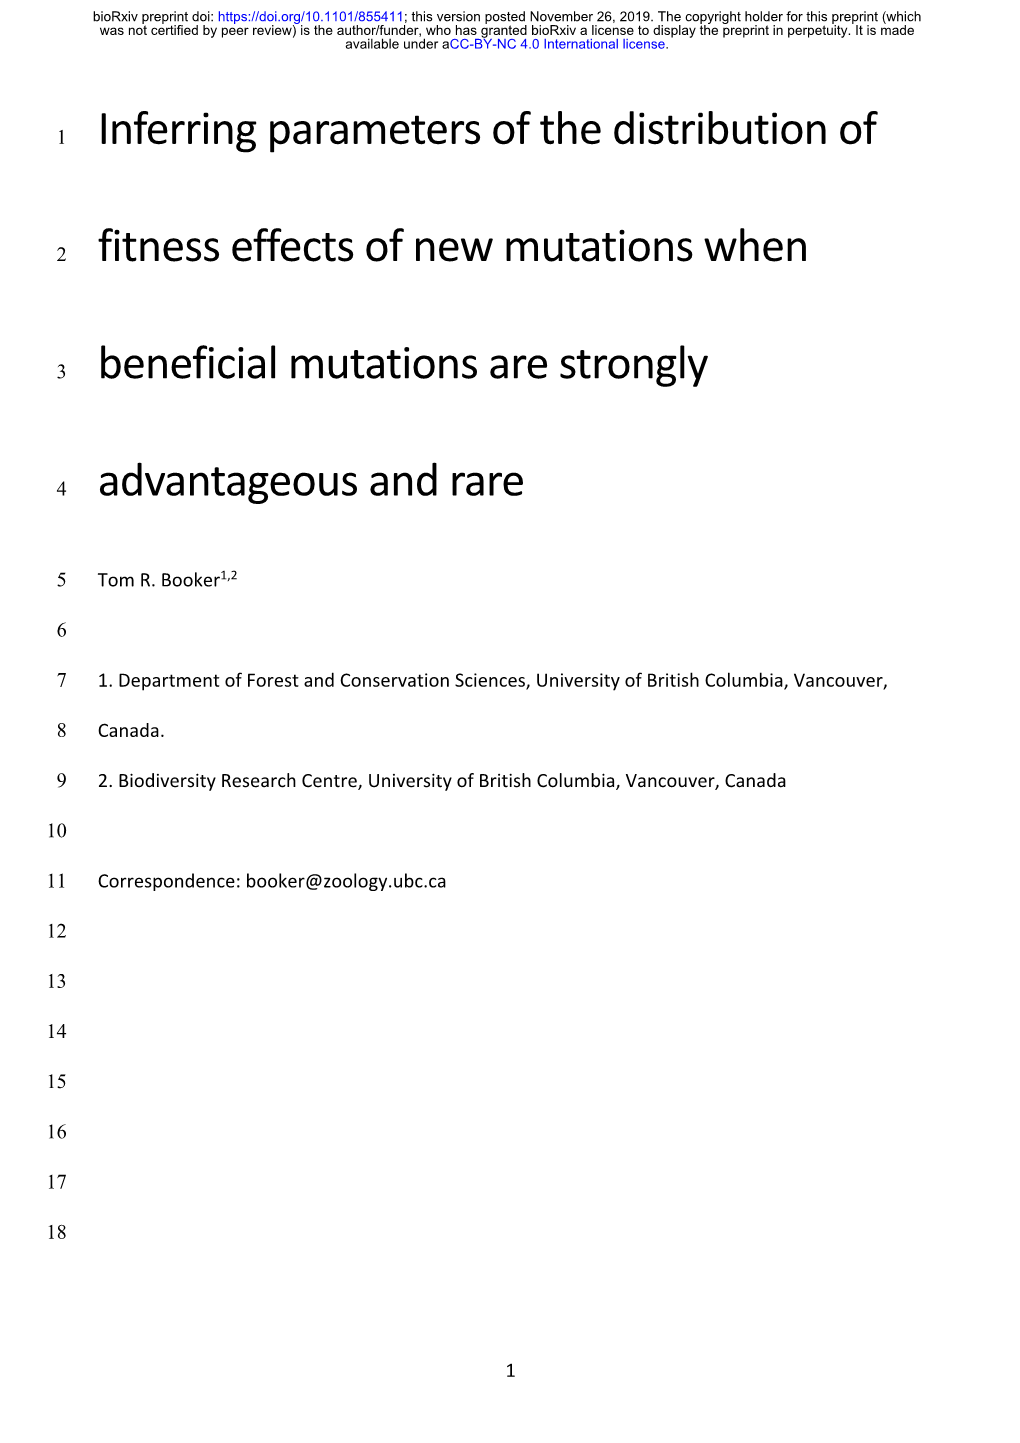 Inferring Parameters of the Distribution of Fitness Effects of New Mutations When Beneficial Mutations Are Strongly Advantageous